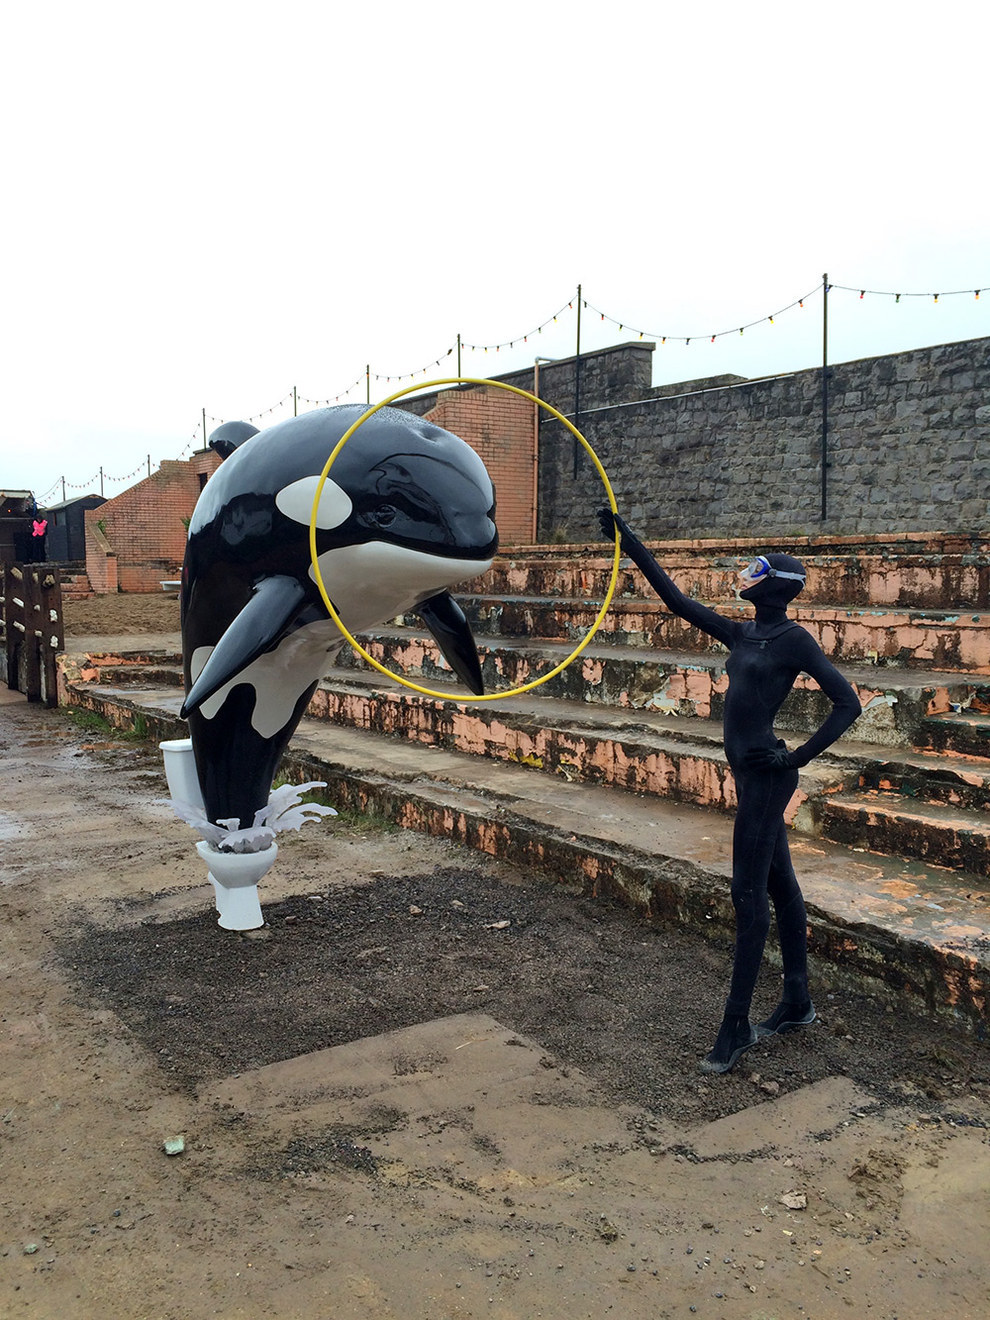 Dismaland. Photo by Christopher Jobson for Colossal